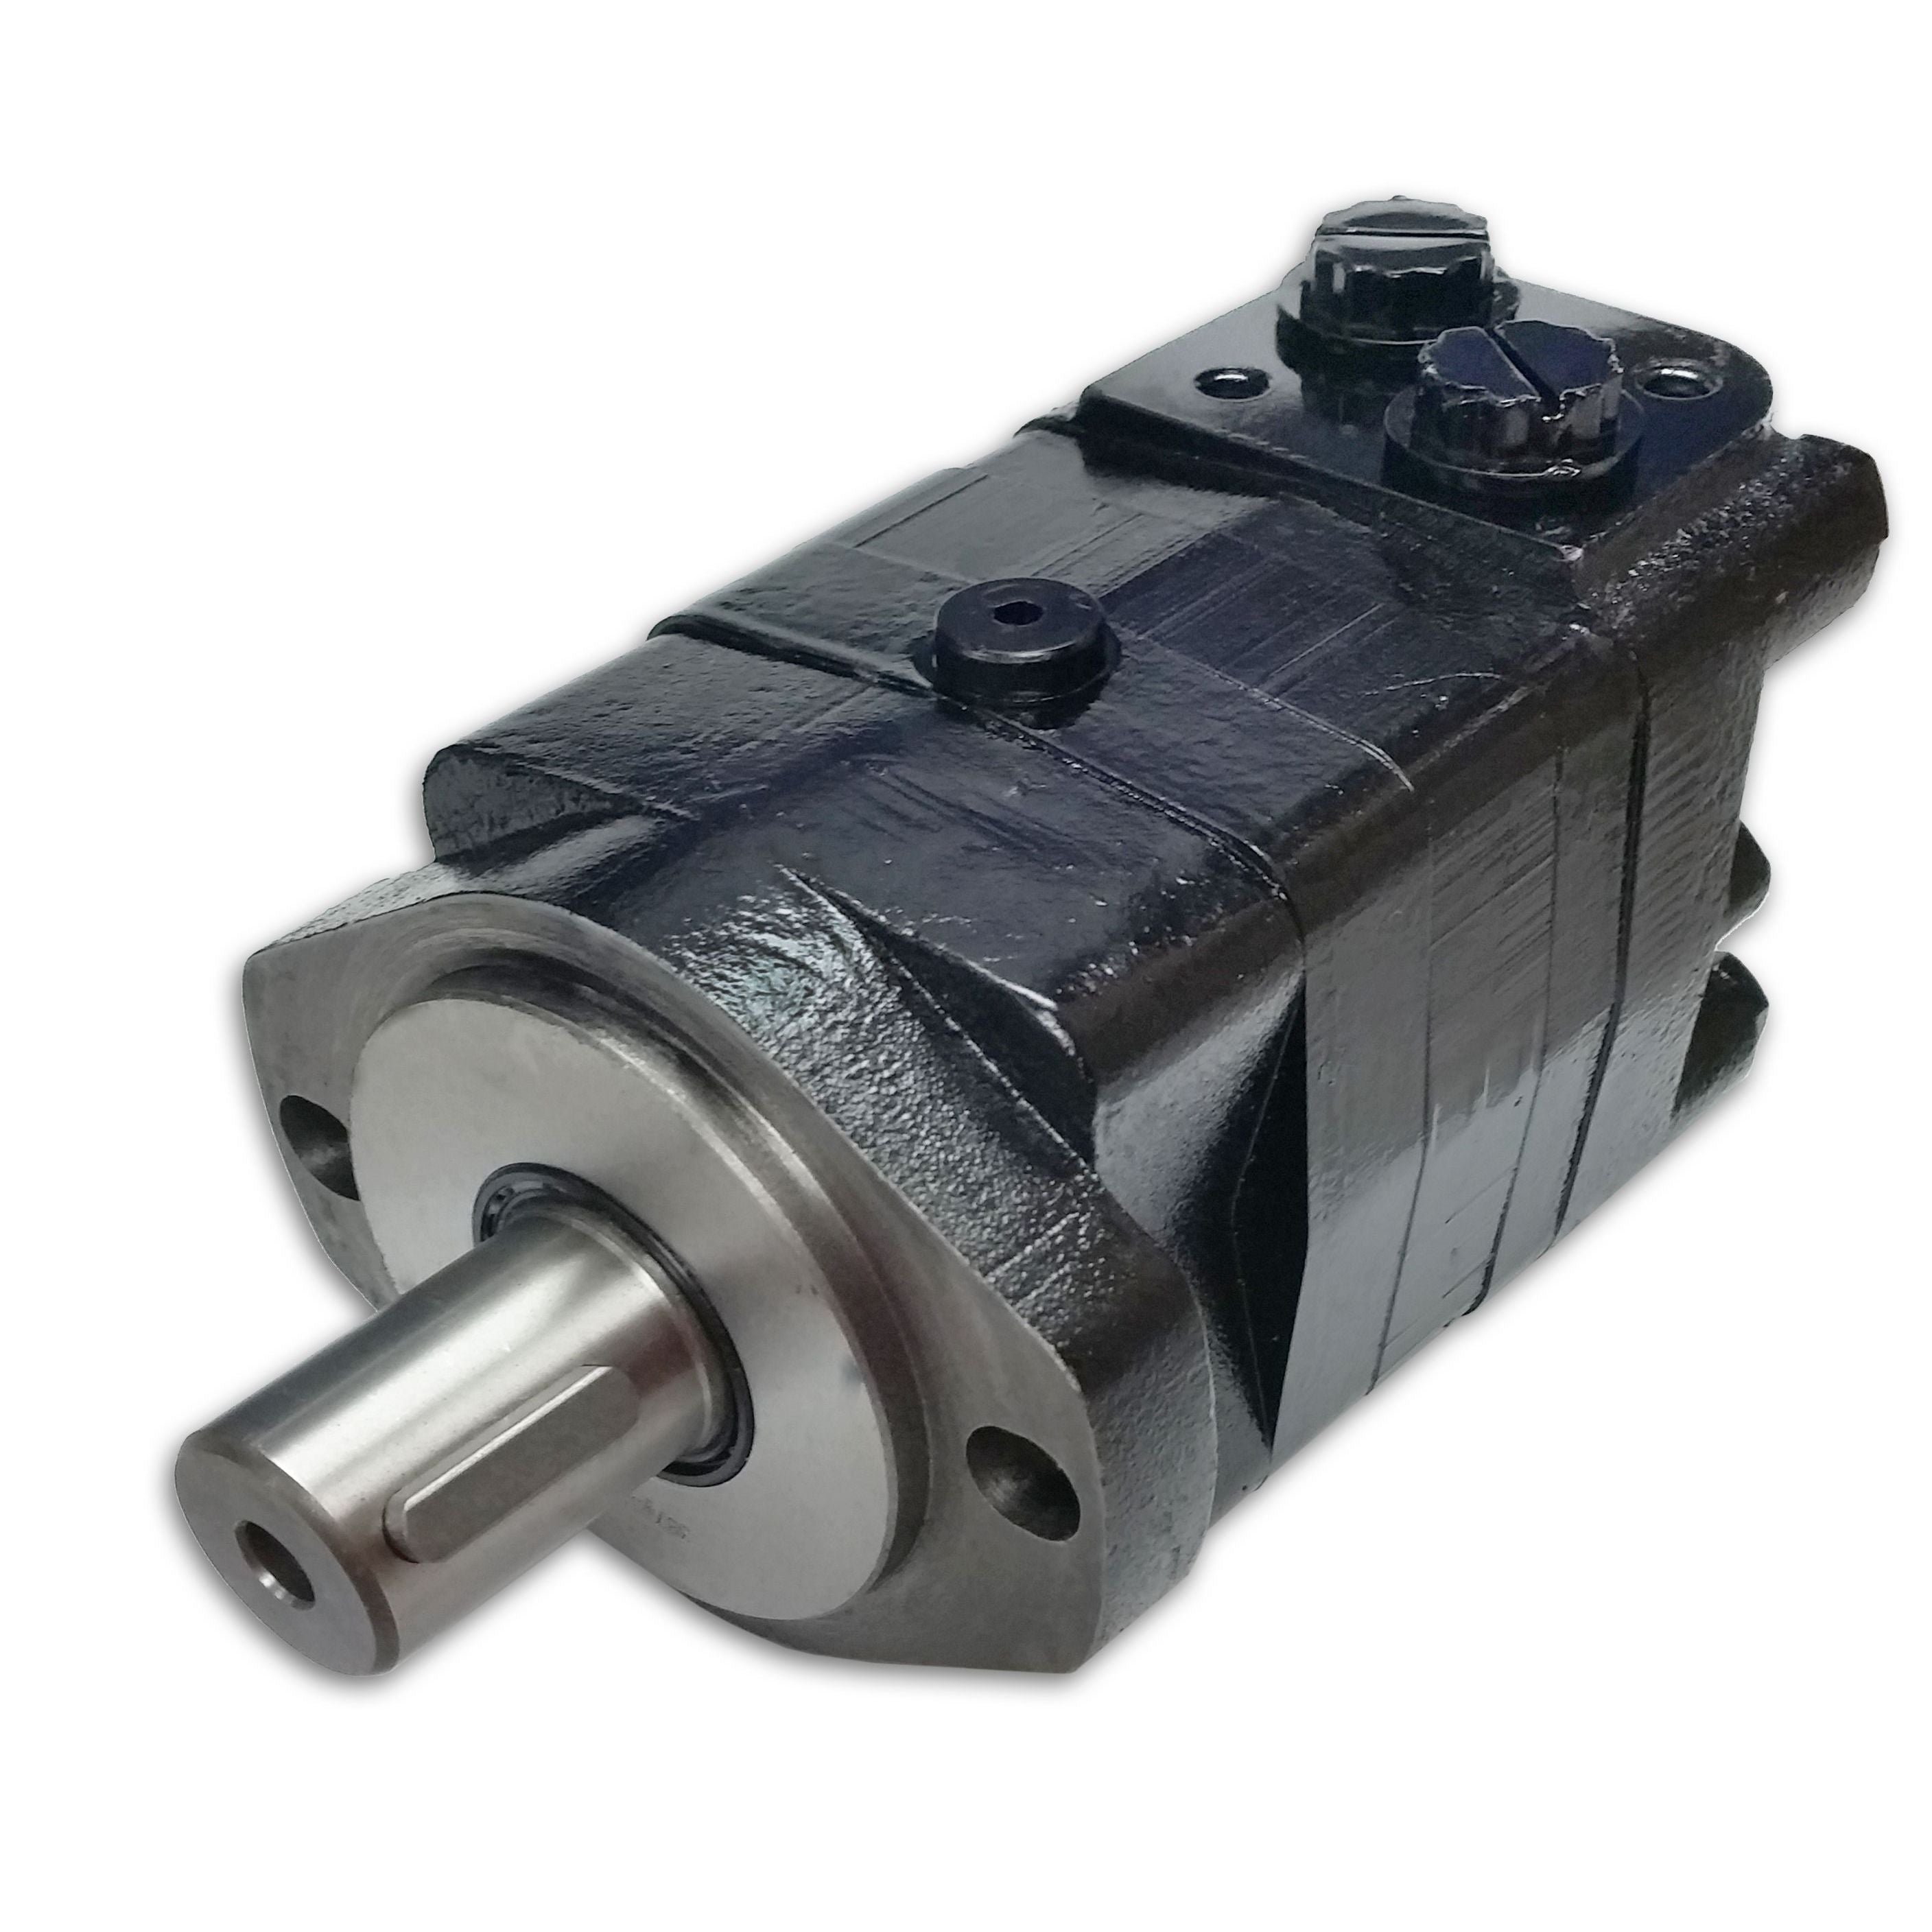 BMSY-475-E2-G-S : Dynamic LSHT Motor, 475cc, 155RPM, 8053in-lb, 2030psi Differential, 19.81GPM, SAE A 2-Bolt Mount, 1.25" Bore x 5/16" Key Shaft, Side Ported, #10 SAE (5/8")